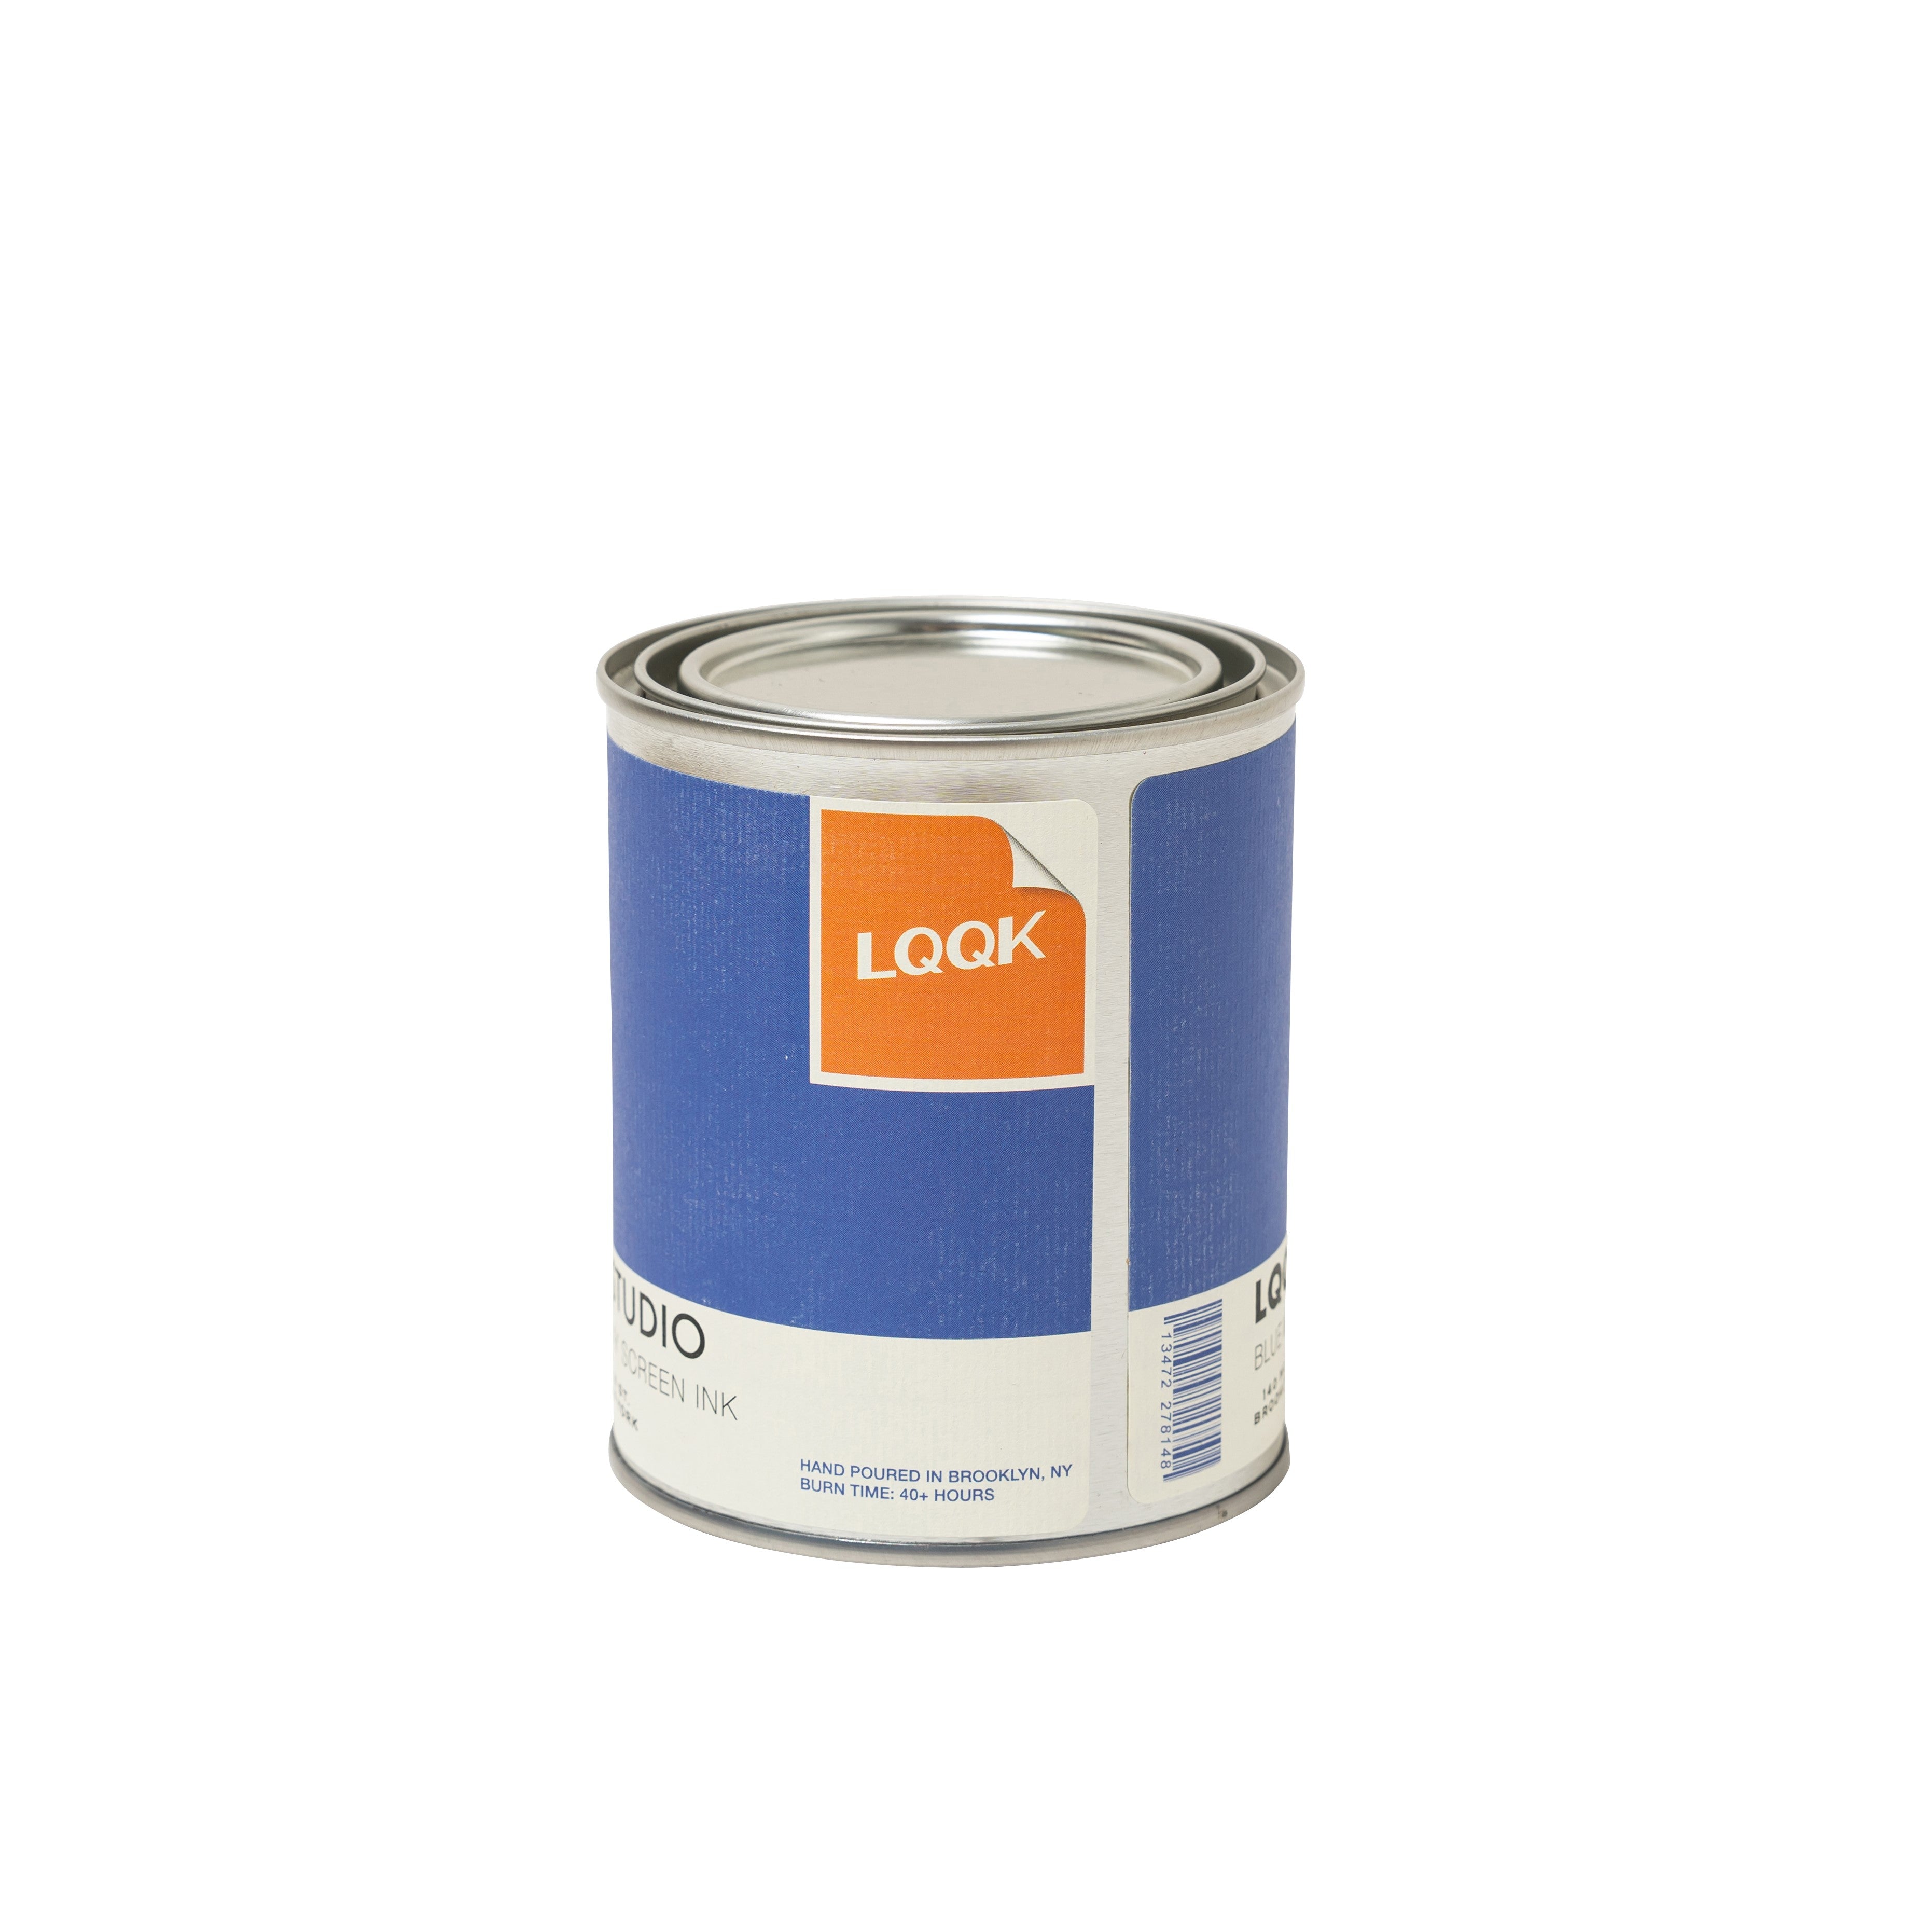 LQQK STUDIO/BLUE MONDAY CAN CANDLE 